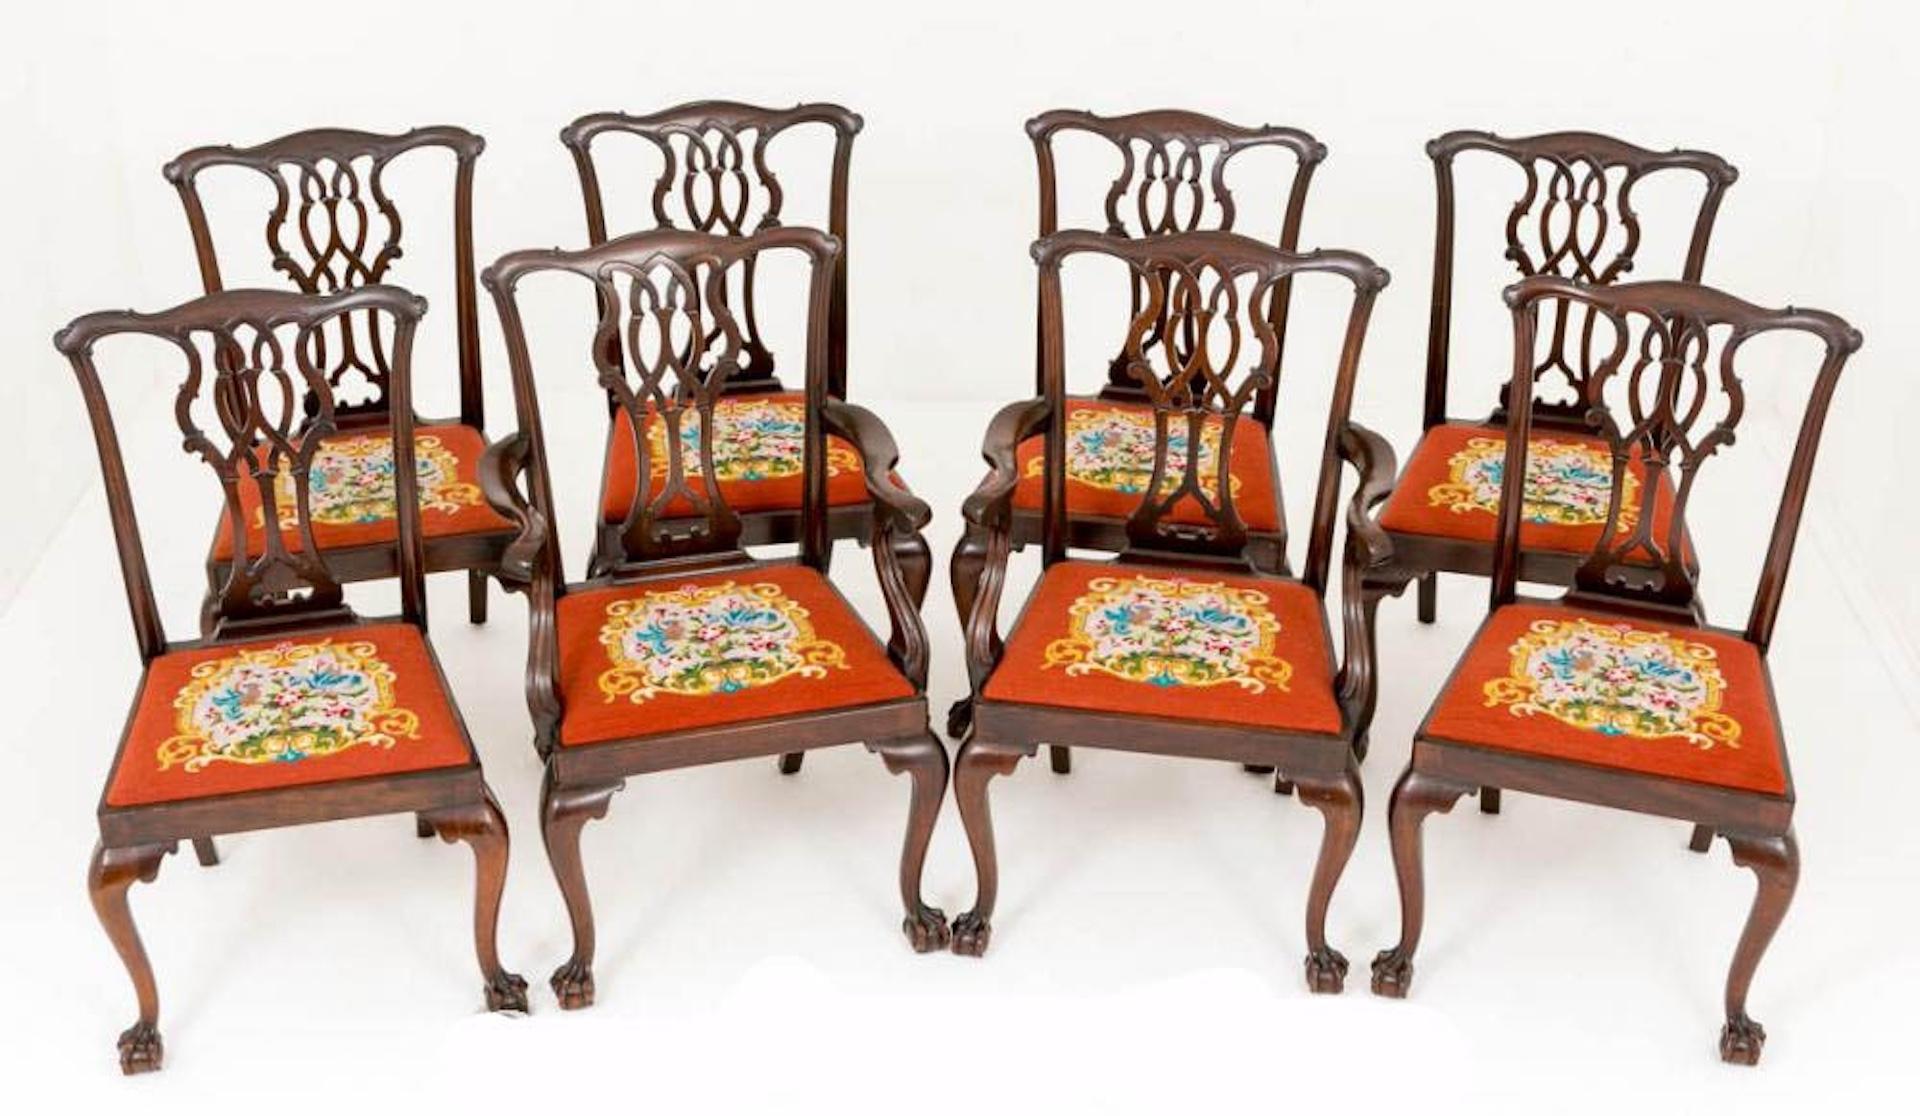 Good Set of 8 (6+2) Mahogany Chippendale Style Dining Chairs.
Circa 1890
Each Chair standing on swept legs with boldly carved Ball and Claw feet.
These chairs retain their original lift out needlework seats. The back splats being of a carved and